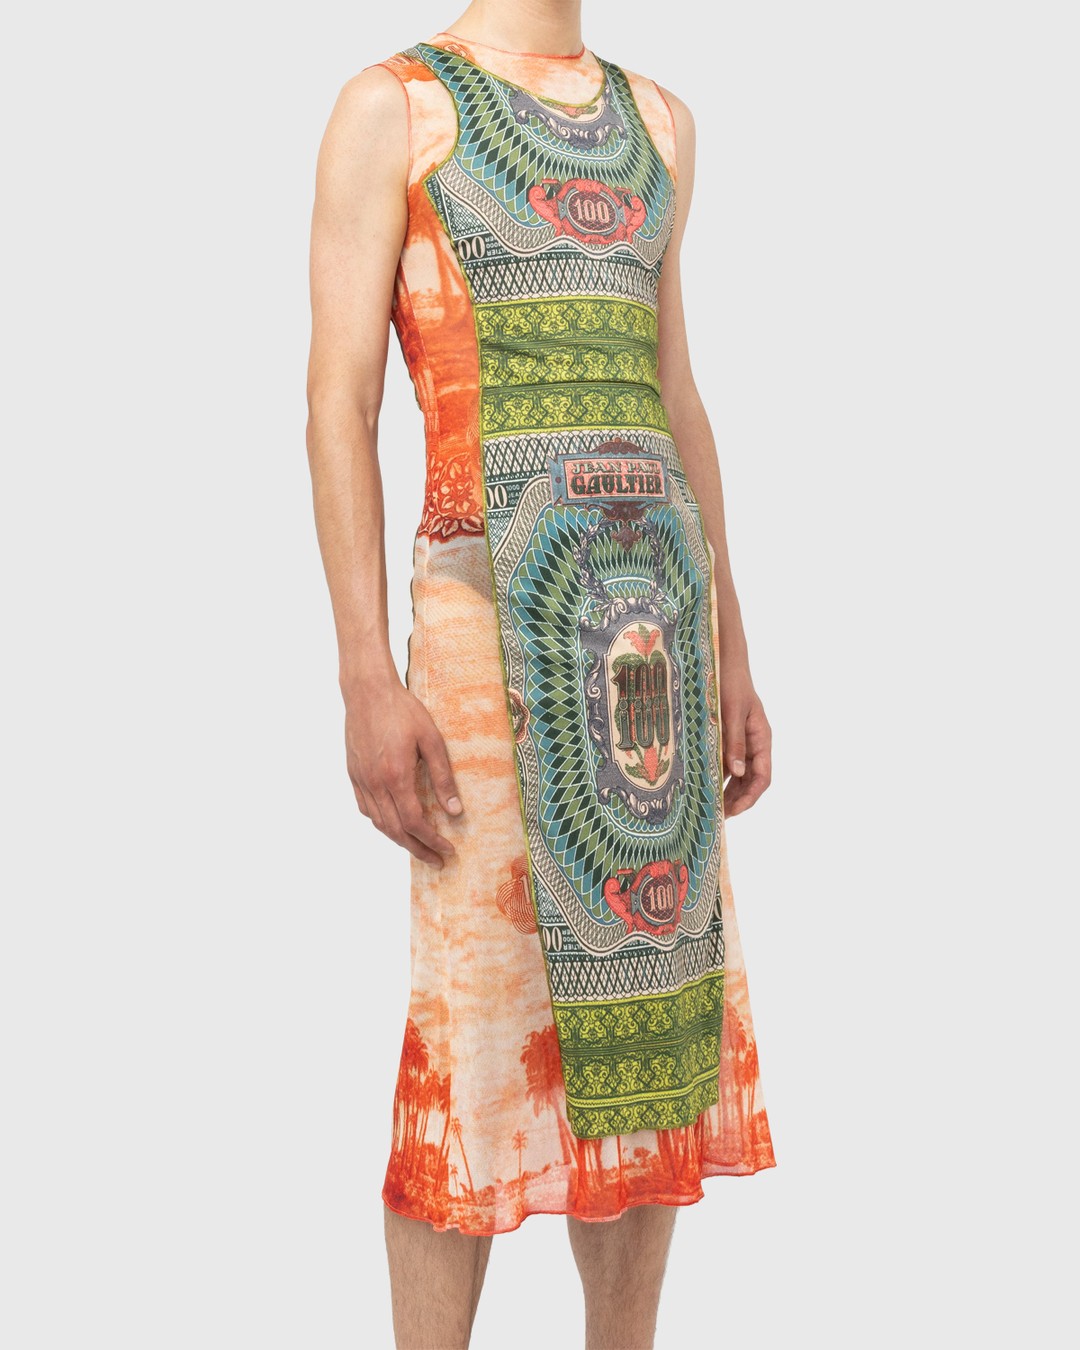 Jean Paul Gaultier – Banknote and Palm Tree Print Dress Multi - Maxi - Green - Image 5